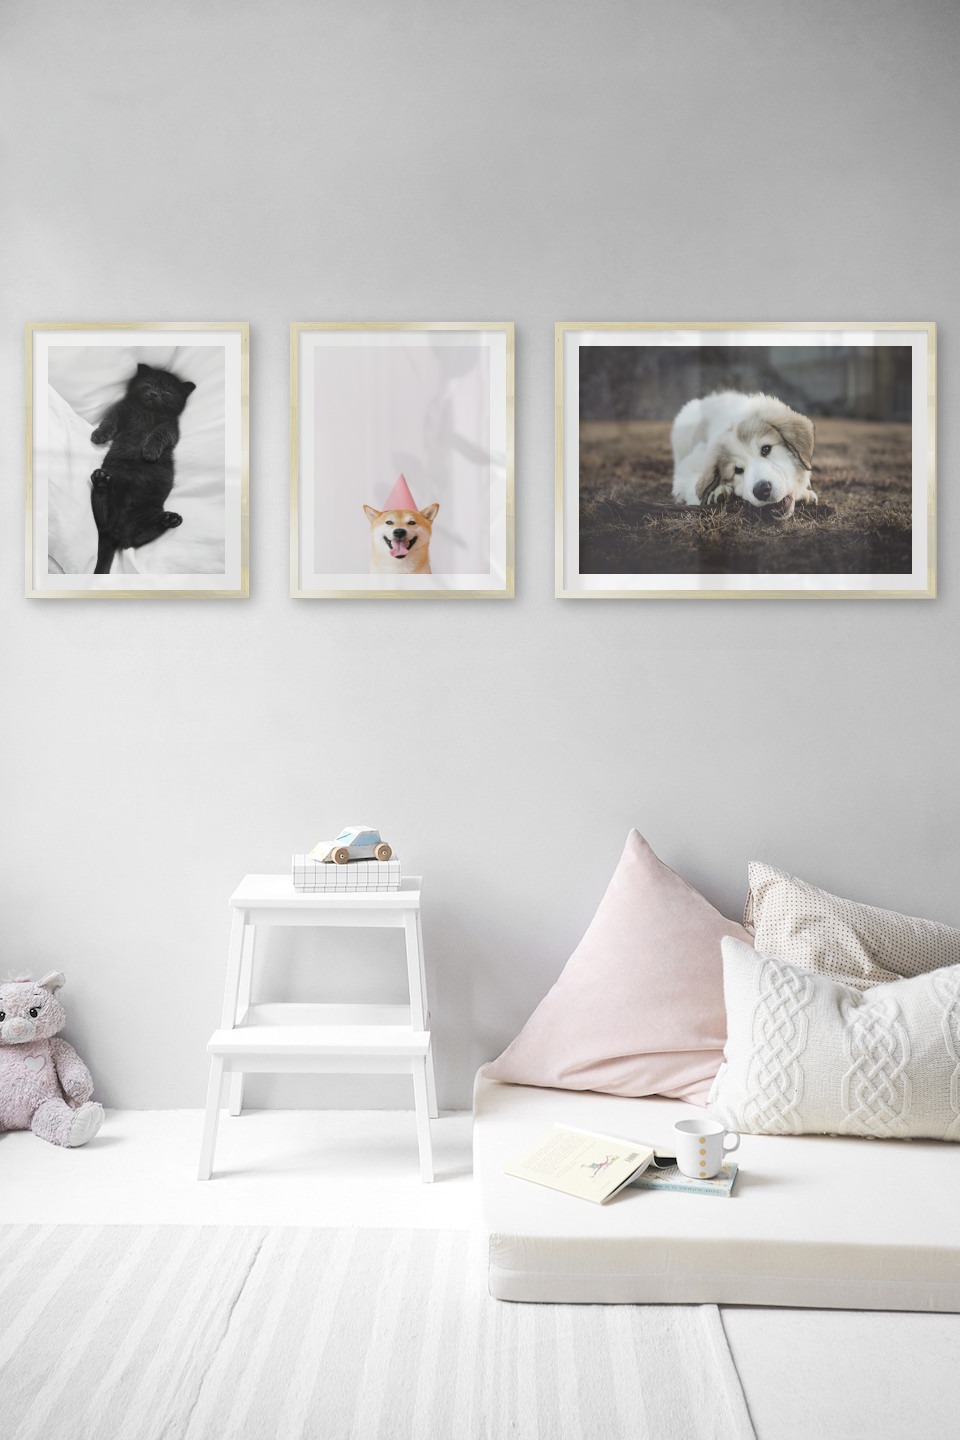 Gallery wall with picture frames in gold in sizes 40x50 and 50x70 with prints "Cat in bed", "Dog with pink hat" and "Dog chewing"